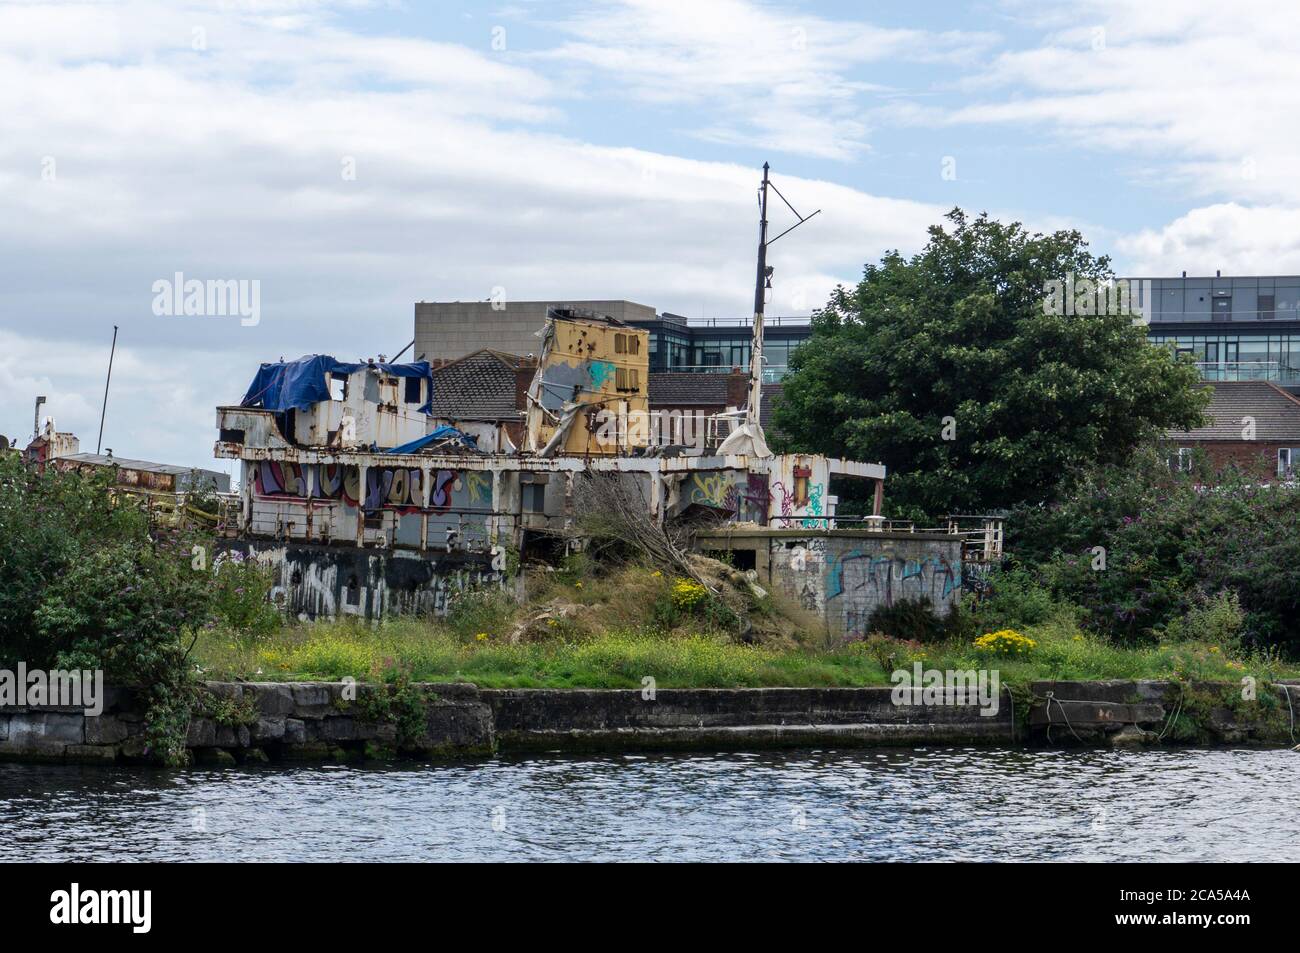 The rusting hulk of the Naomh Eanna, a former ferryboat lying in dry dock in the Grand Canal Lock in Dublin, Ireland. There are plans to refurbish it. Stock Photo